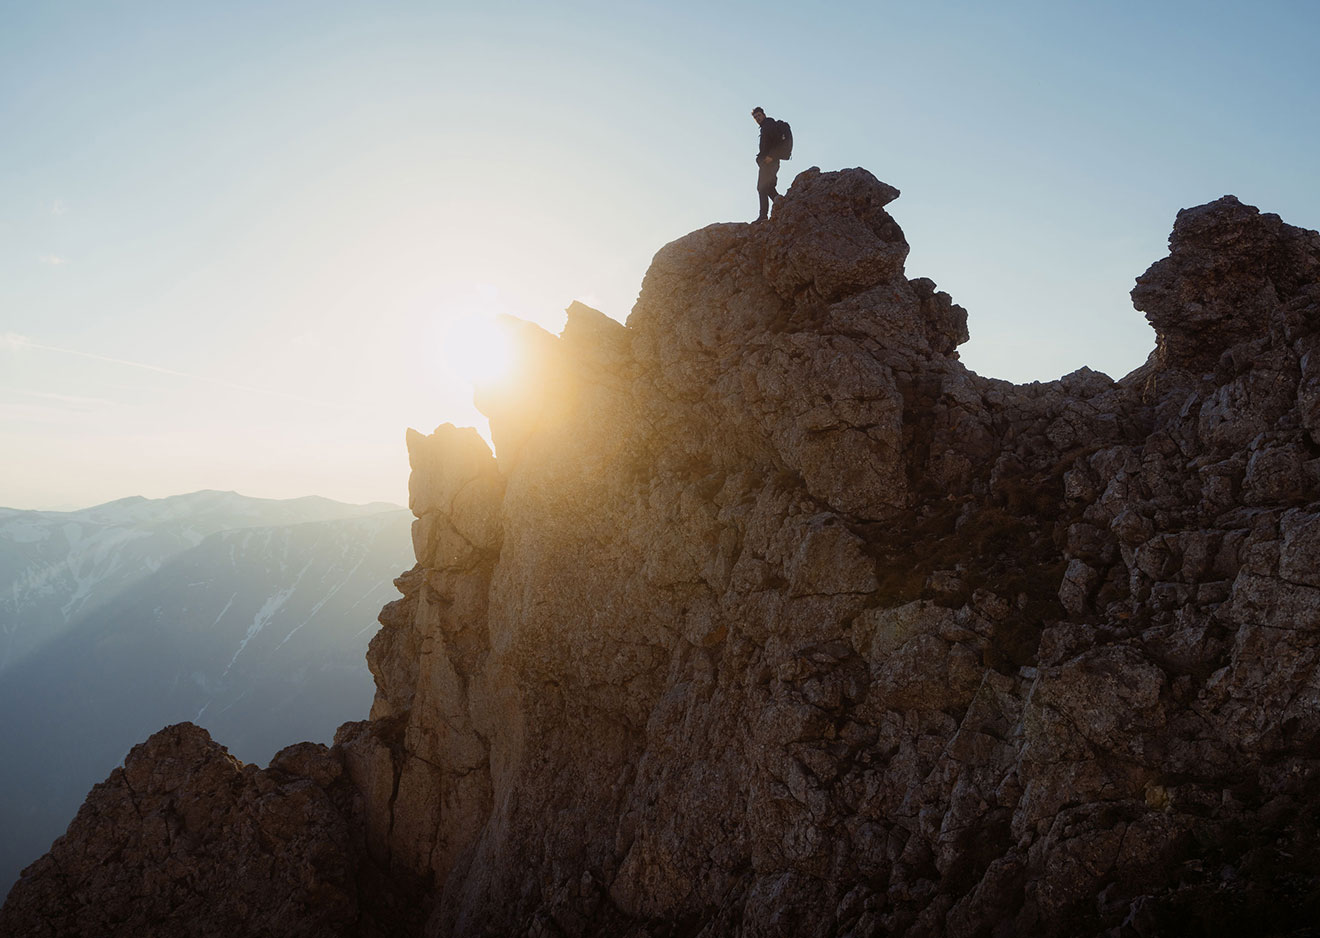 Outline of a mountaineer on an exposed summit silhouetted against the rising sun